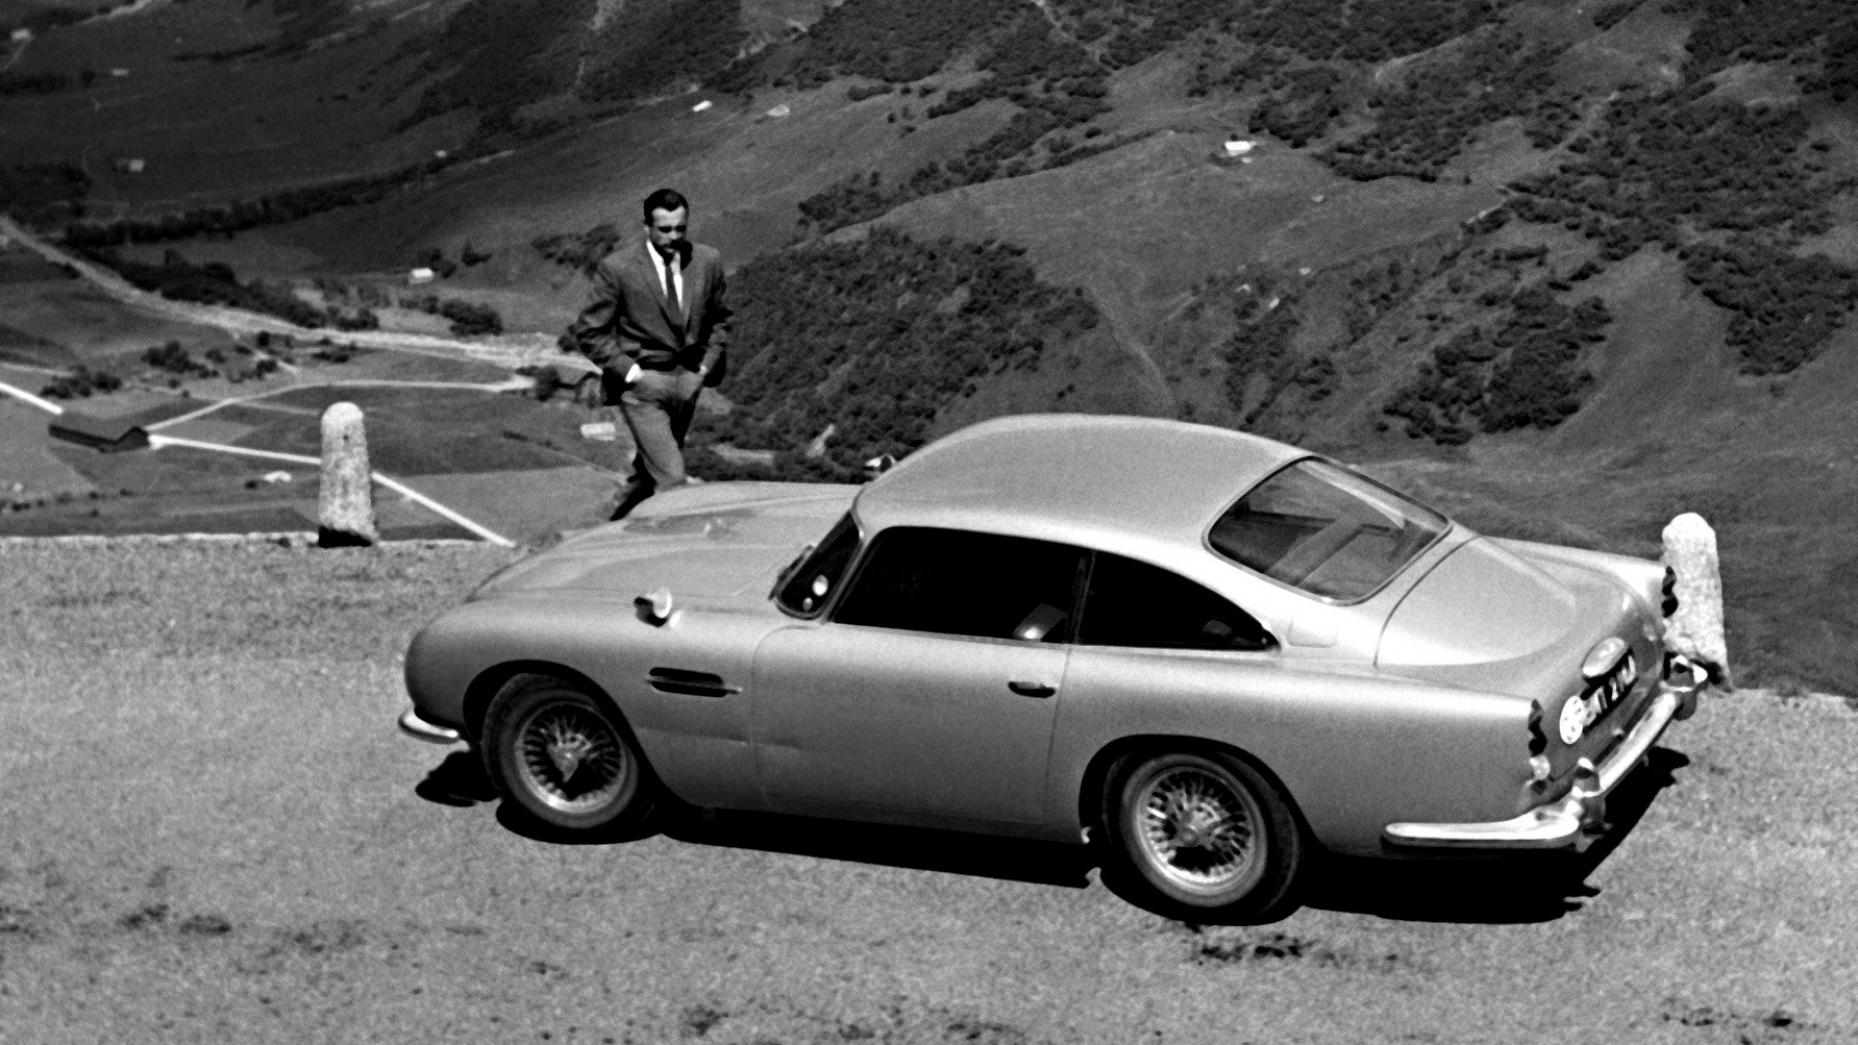 Top 10 Cars Featured In James Bond Movies - Page 5 of 5 - viralhavoc